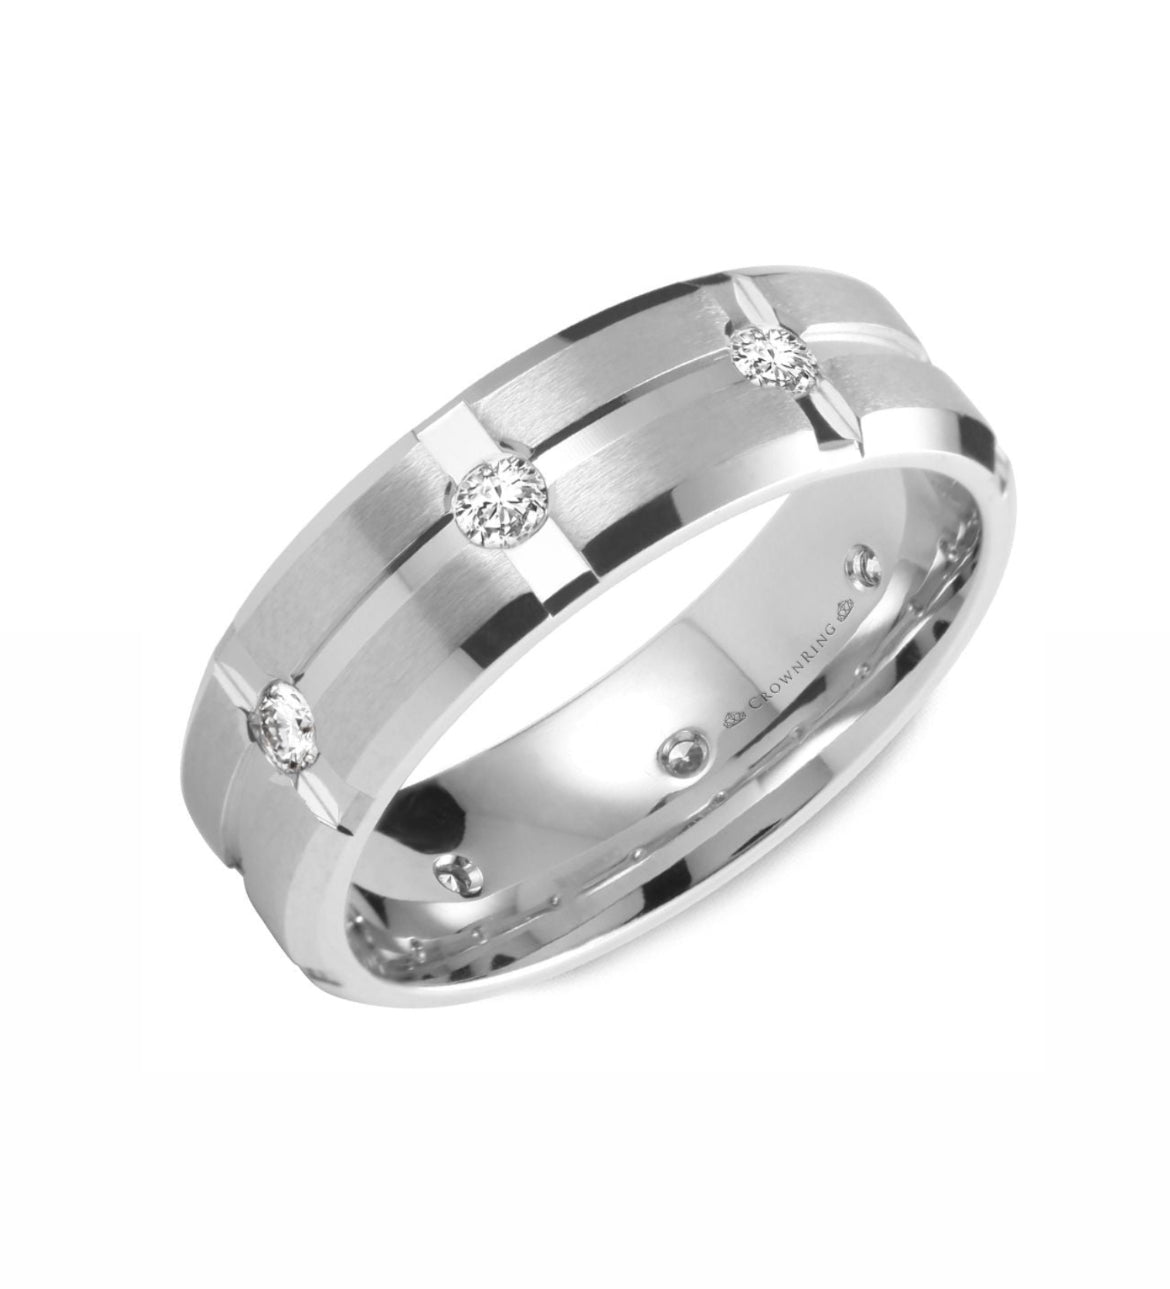 CrownRing Collection - 14k White Gold 6 mm Polished Band with Diamond walls.